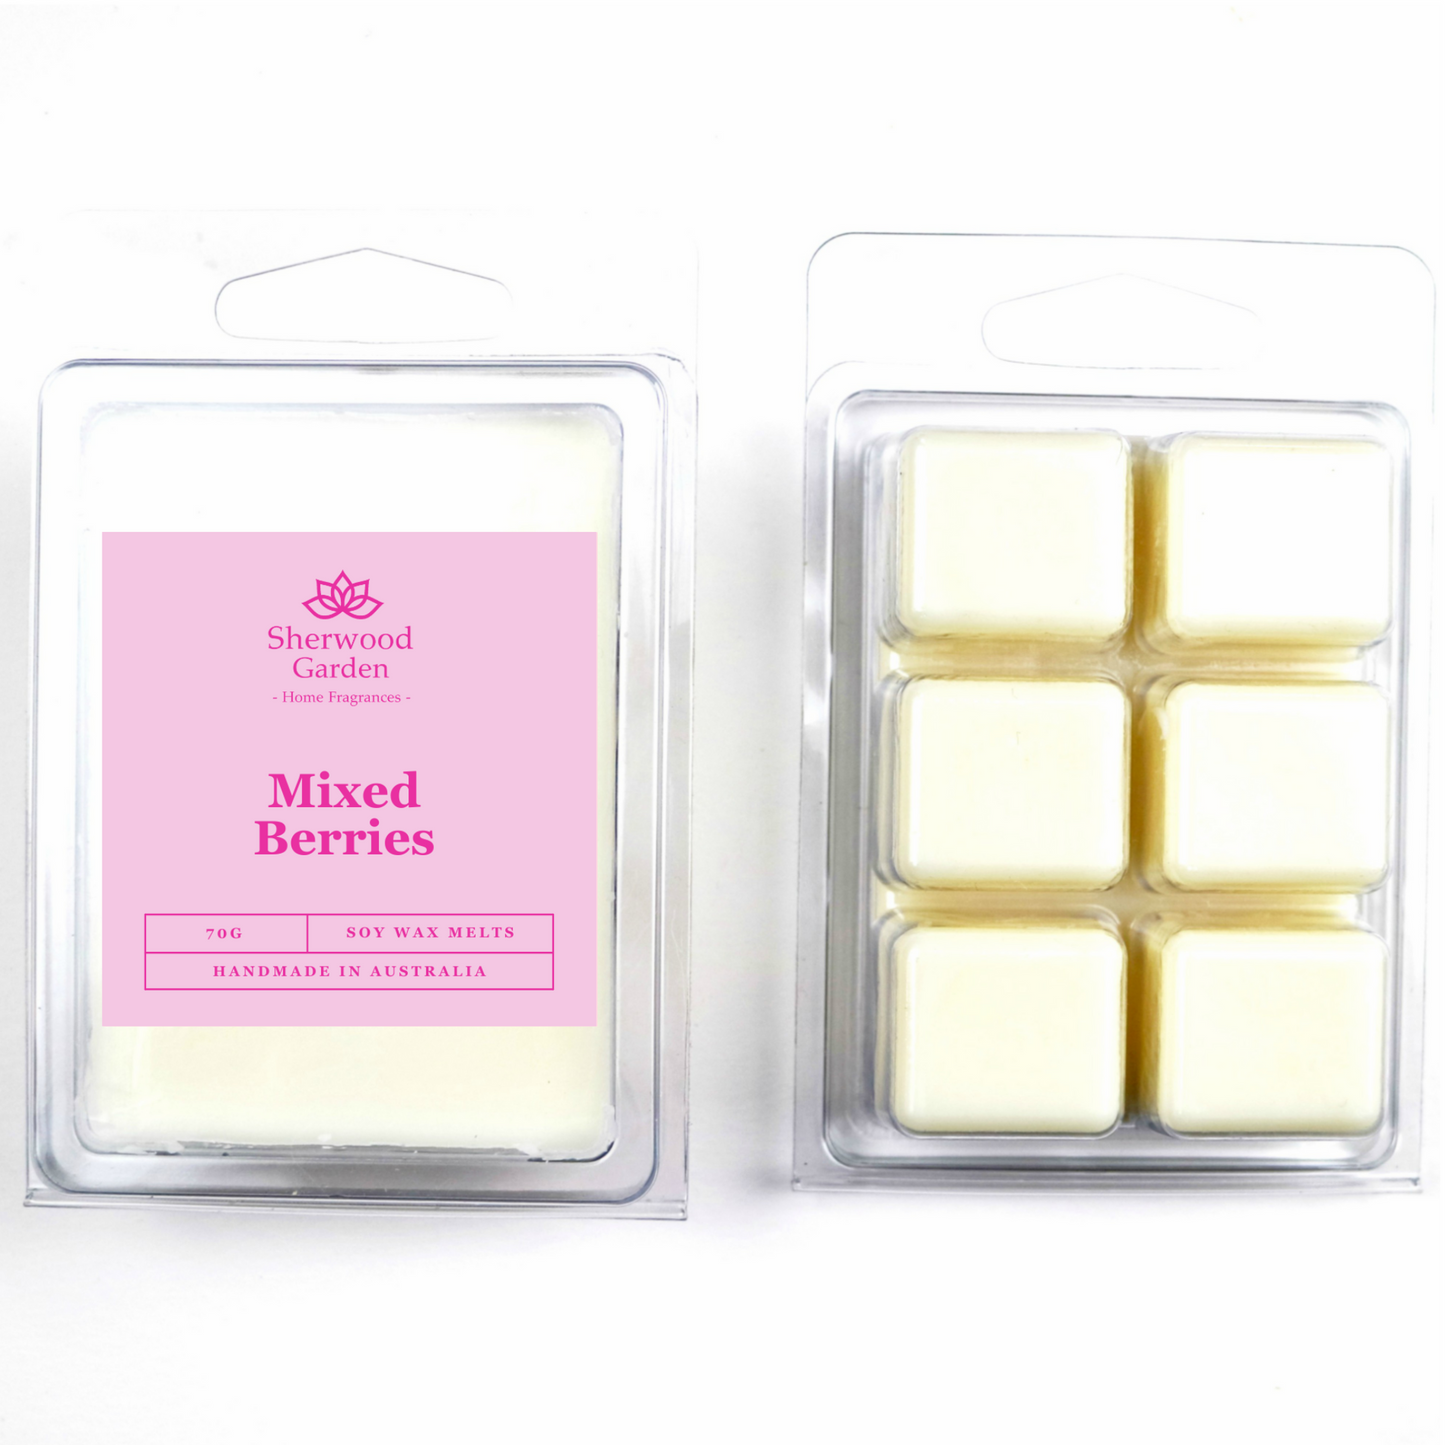 Mixed Berries Soy Wax Melts 70g